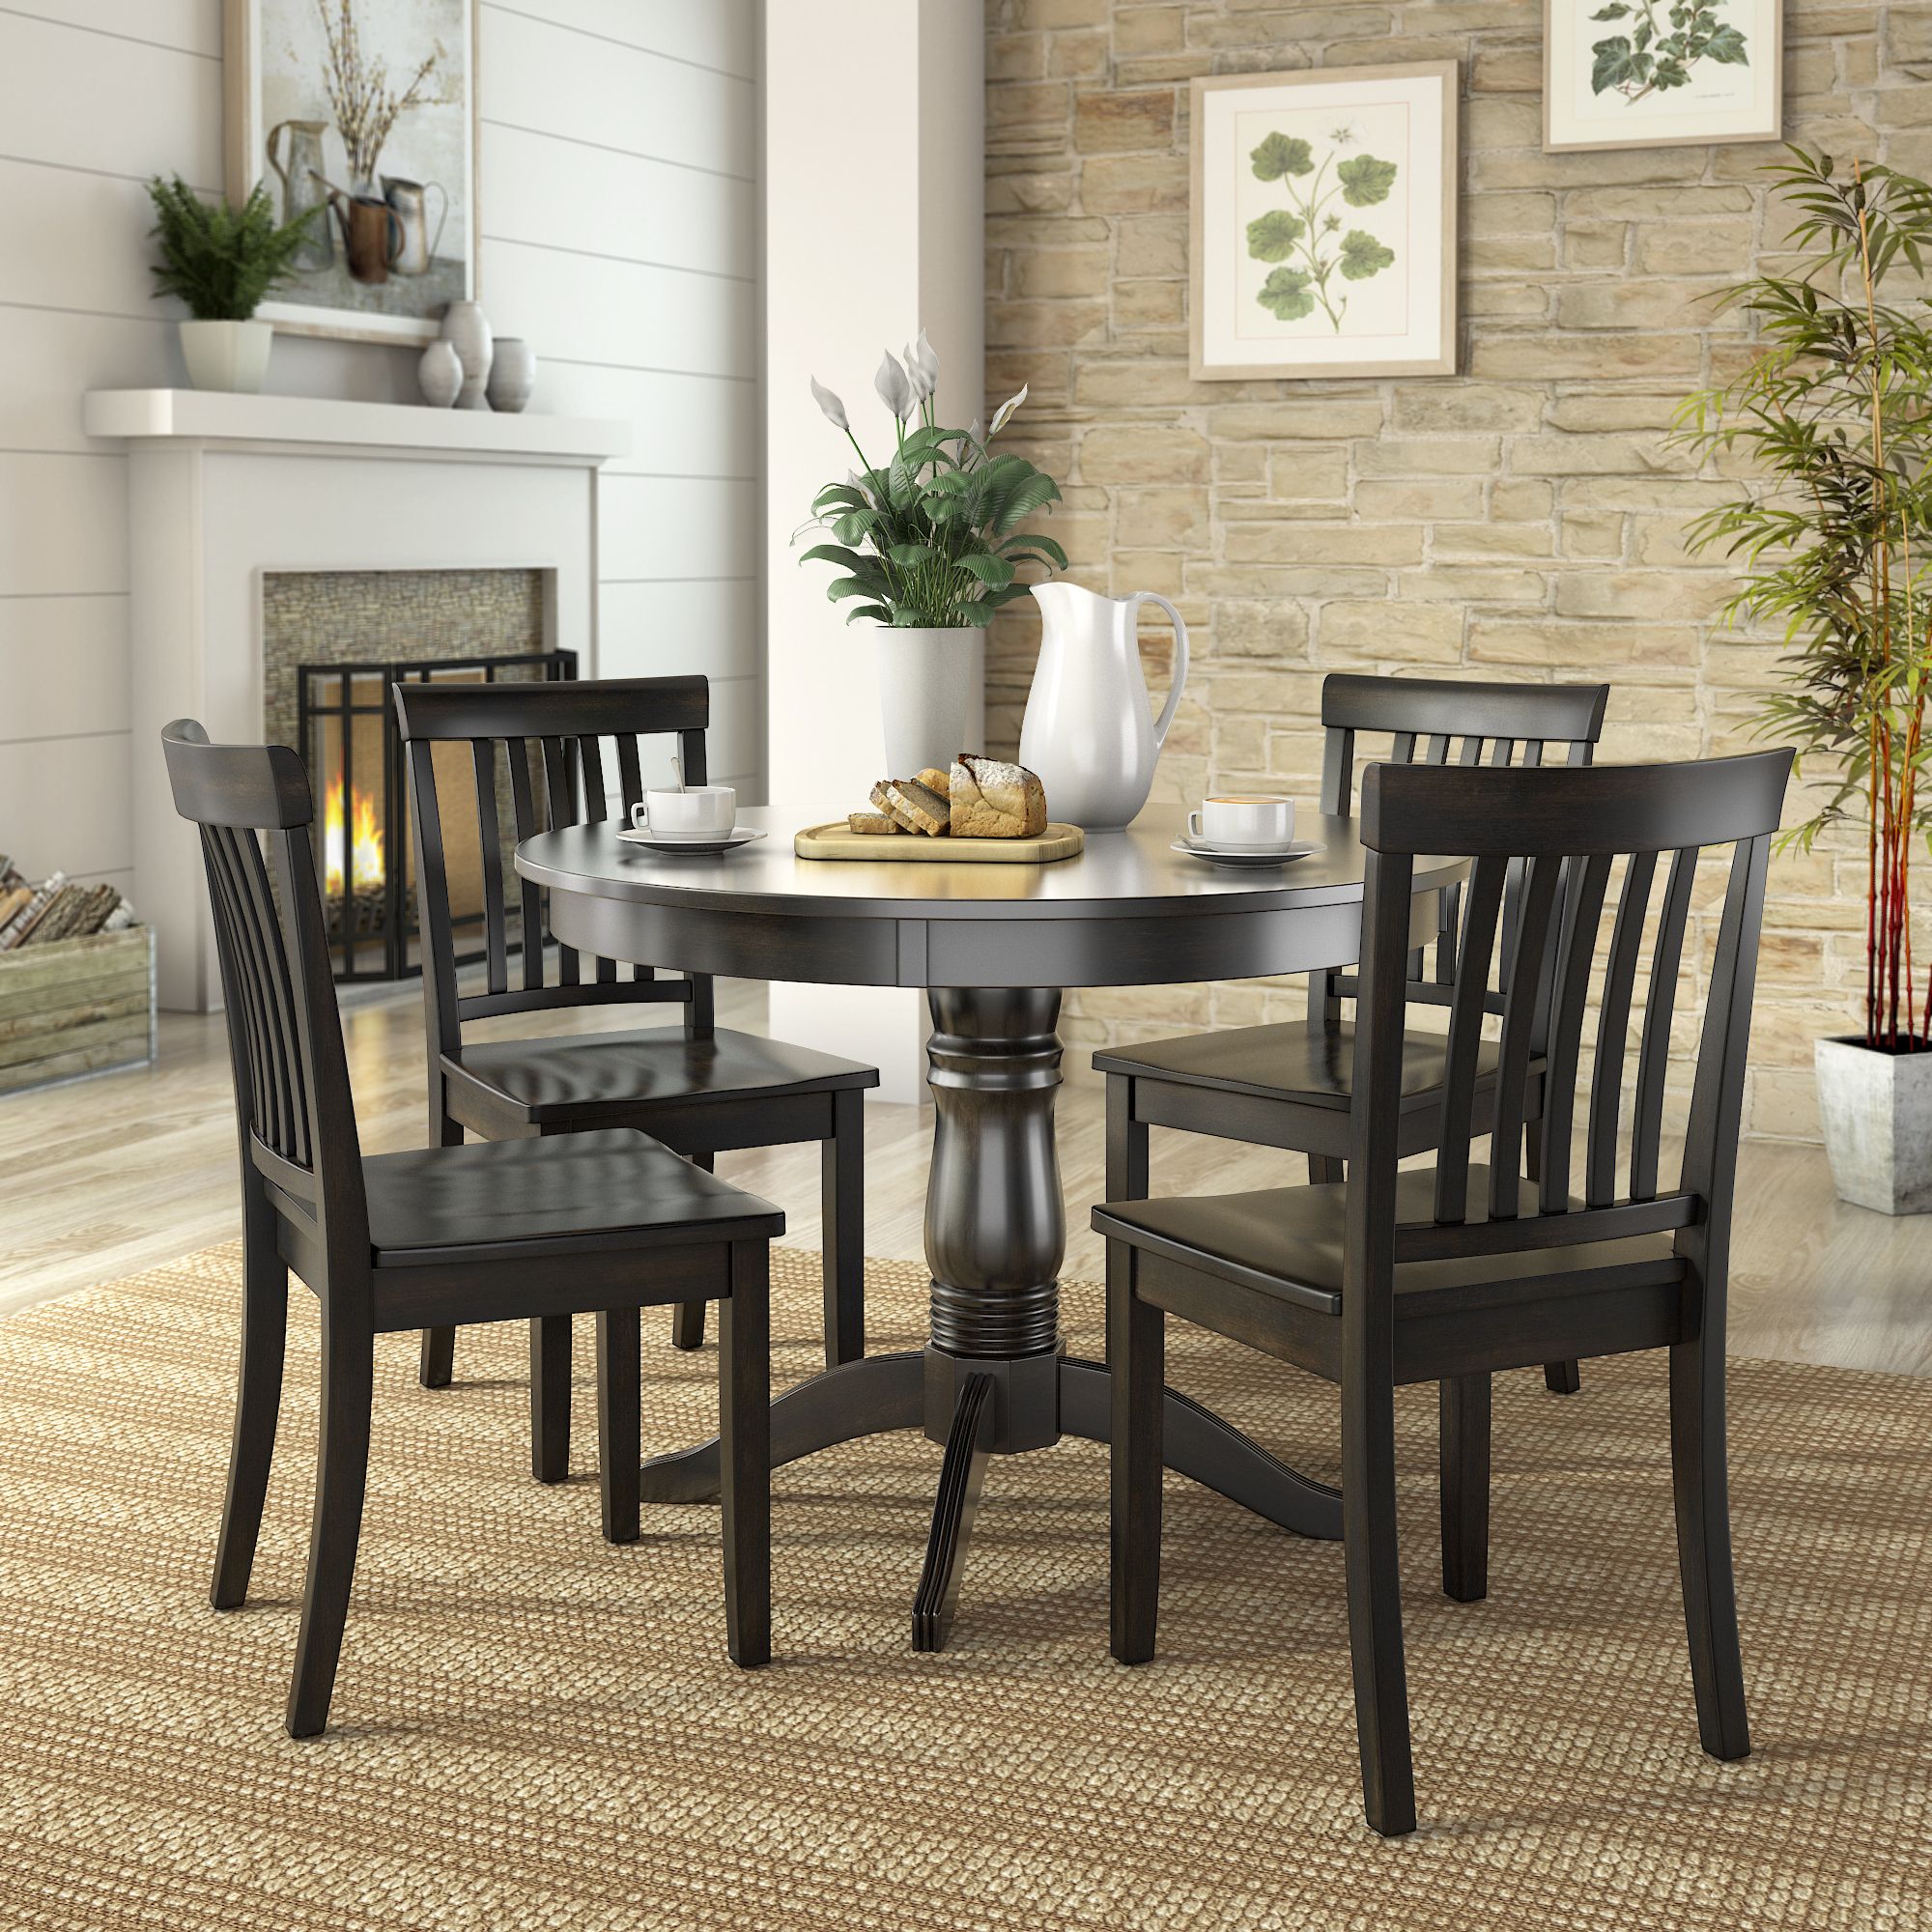 5 Piece Round Dining Sets Within Popular Lexington 5 Piece Wood Dining Set, Round Table And 4 Mission Back (View 3 of 15)